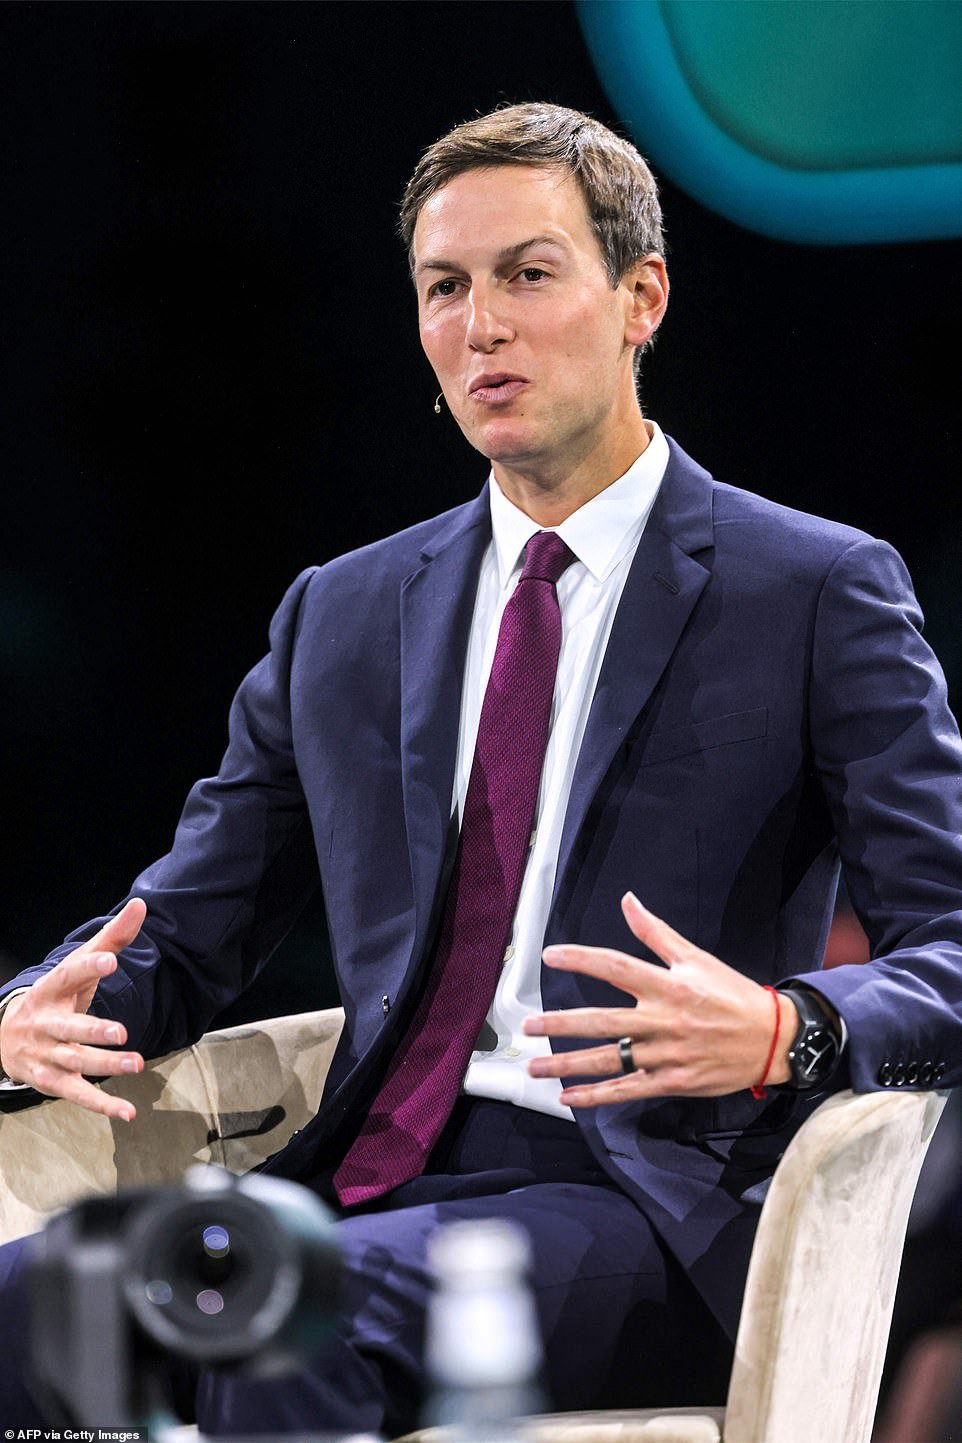 Kushner helped broker the Abraham Accords while serving in the Trump administration in an effort to achieve peace in the Middle East and normalize relations between Israel and its neighbors.  The accords were signed in September 2020 by Israel, Bahrain, Morocco, Sudan and the United Arab Emirates.  Now, Kushner claims, Saudi Arabia wants to join the pact.